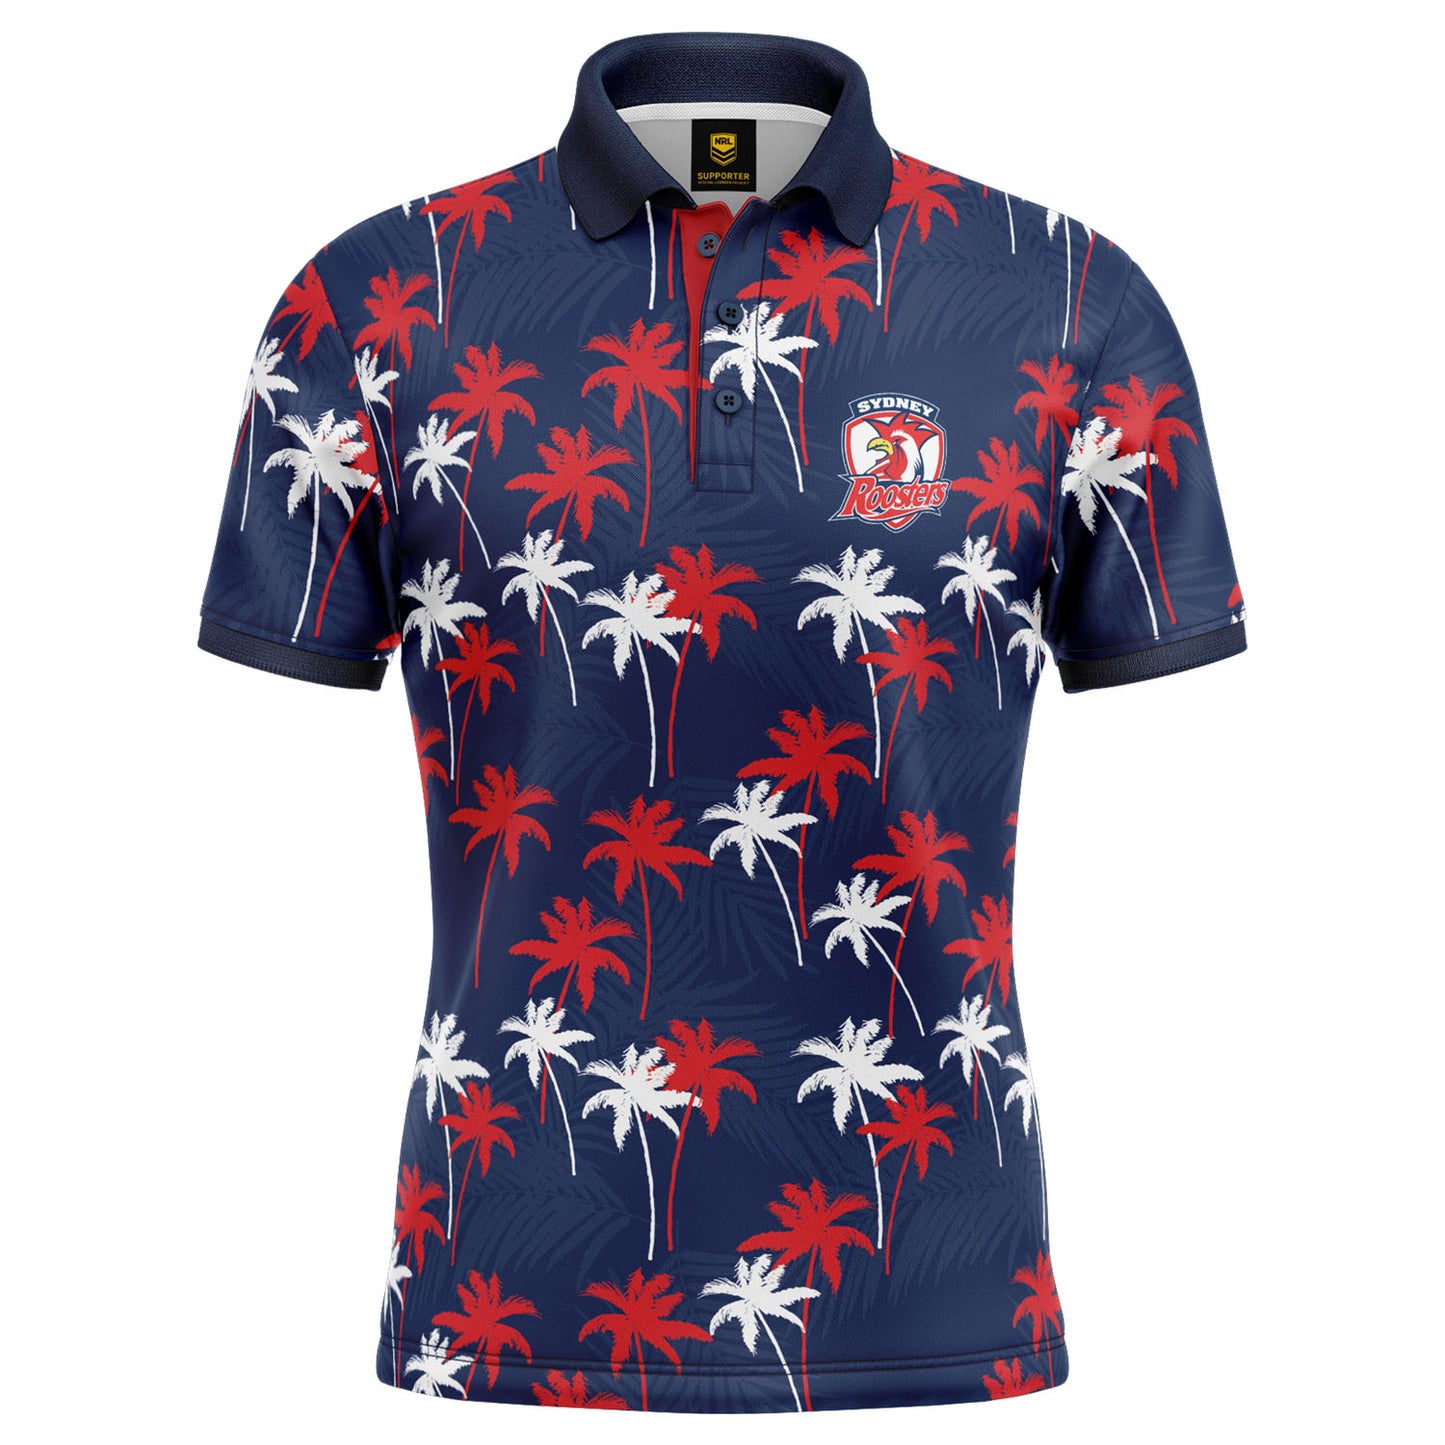 Sydney Roosters 'Par-Tee' Golf Polo